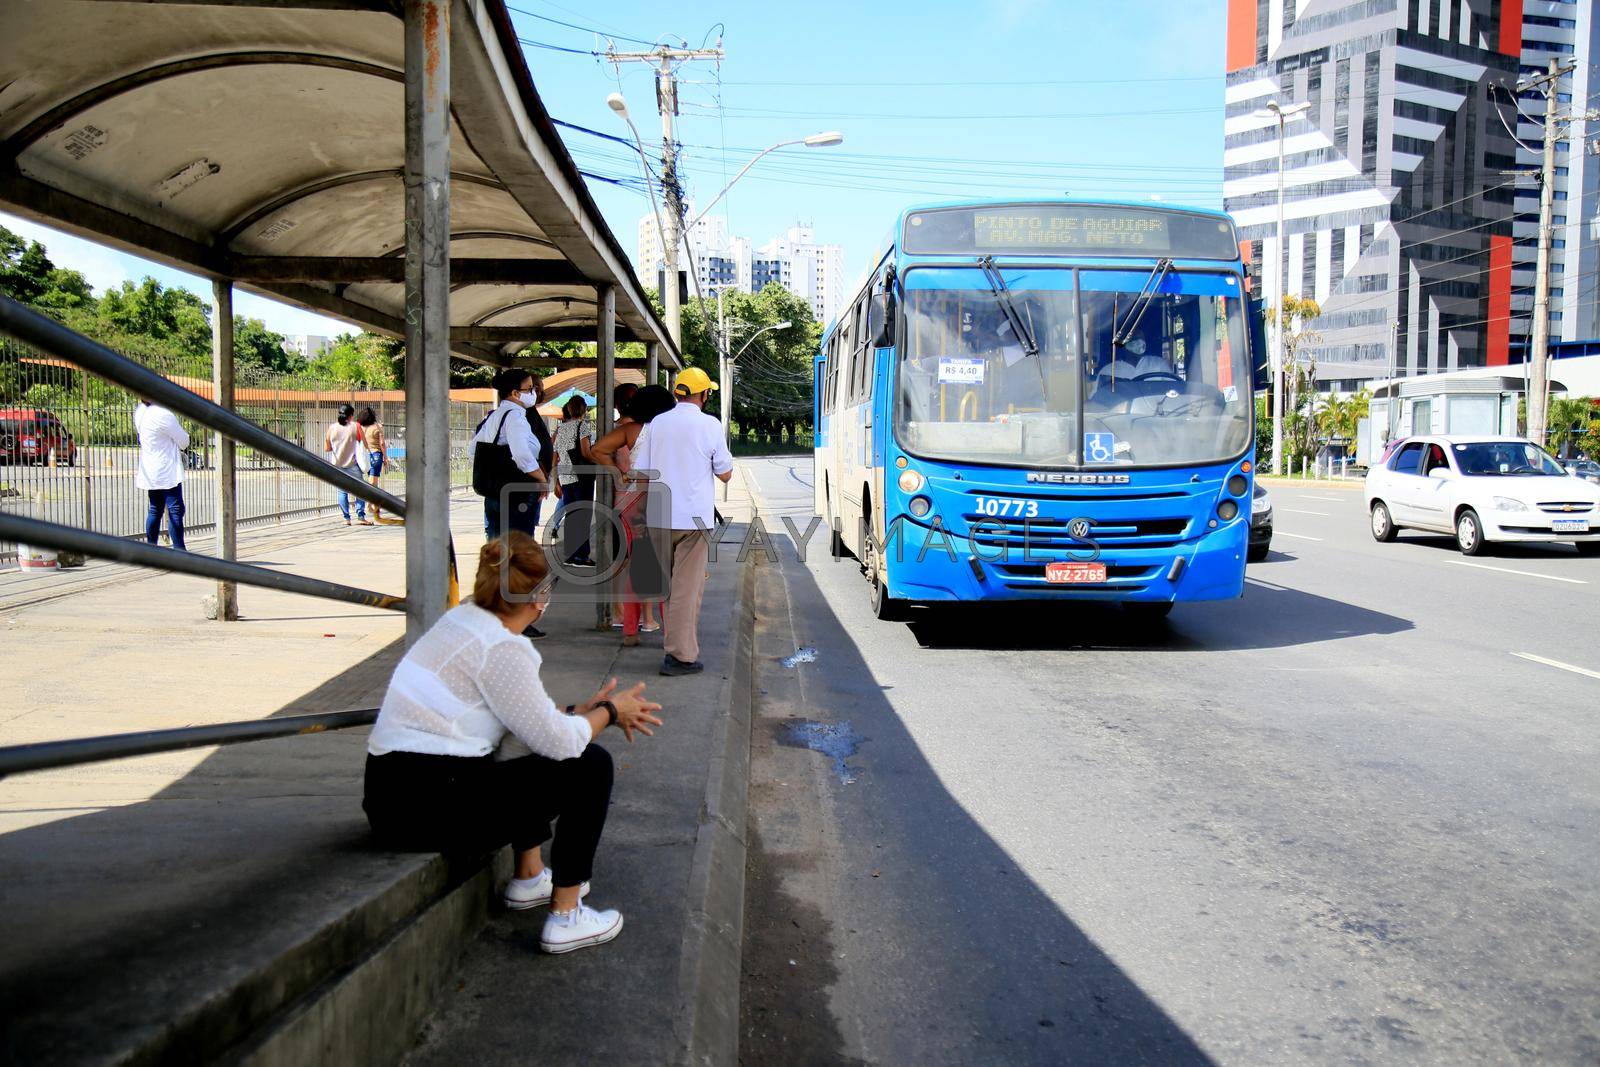 salvador, bahia, brazil - july 20, 2021: passengers are seen waiting for public transport buses at a bus stop in the city of Salvador.